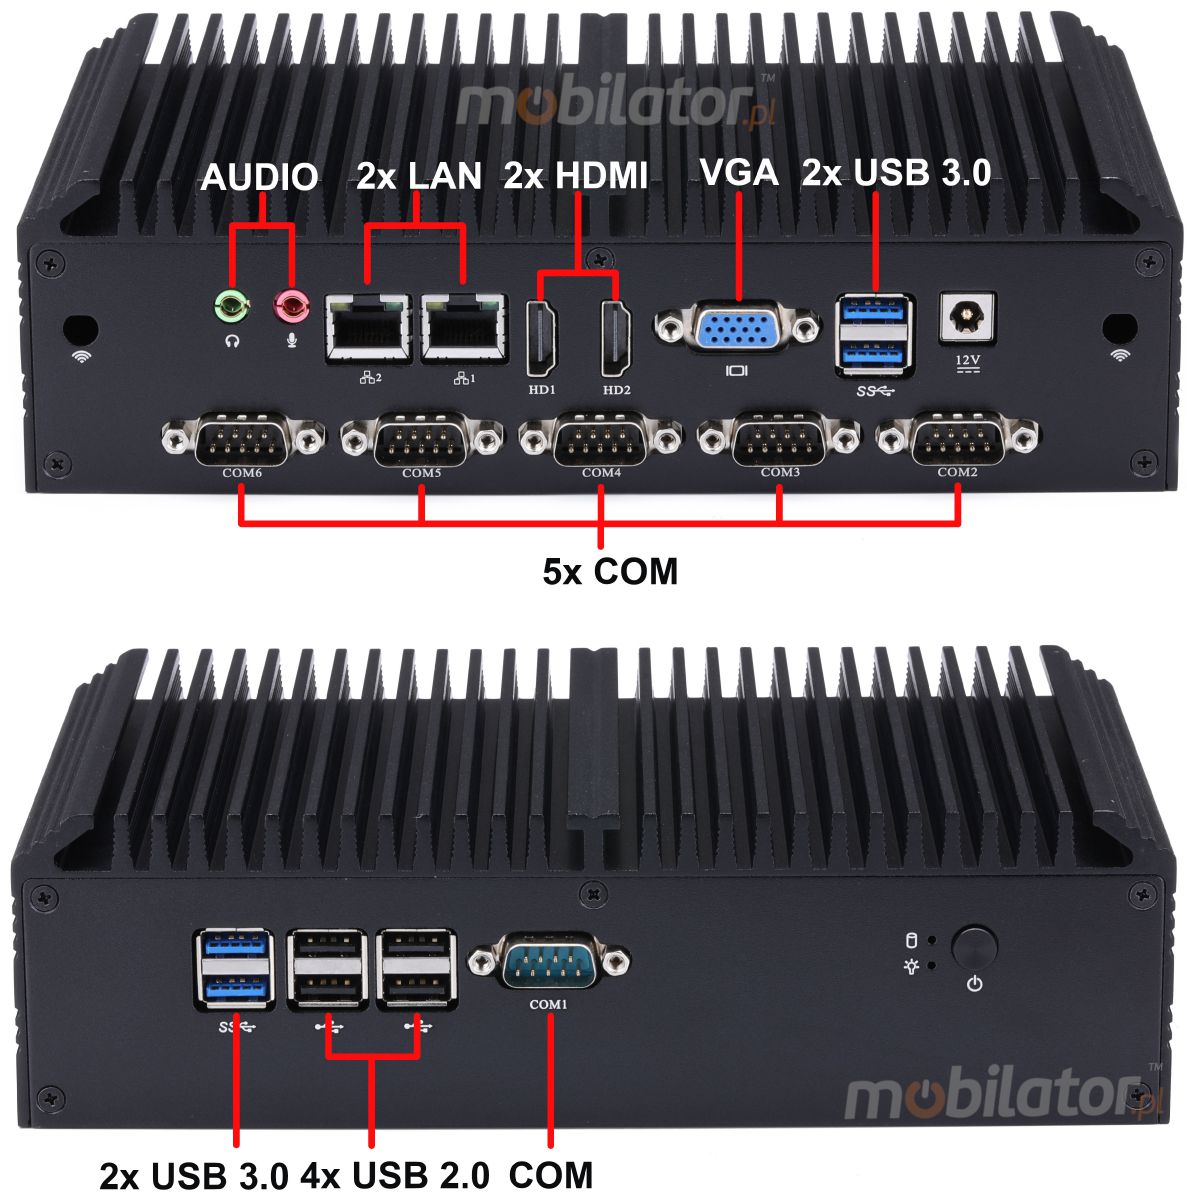 mBox X105 v.5 - Industrial Mini Computer with 500GB HDD disk with Wifi and Bluetooth, 4 USB 3.0 ports, 6x RS-232 - Interfaces